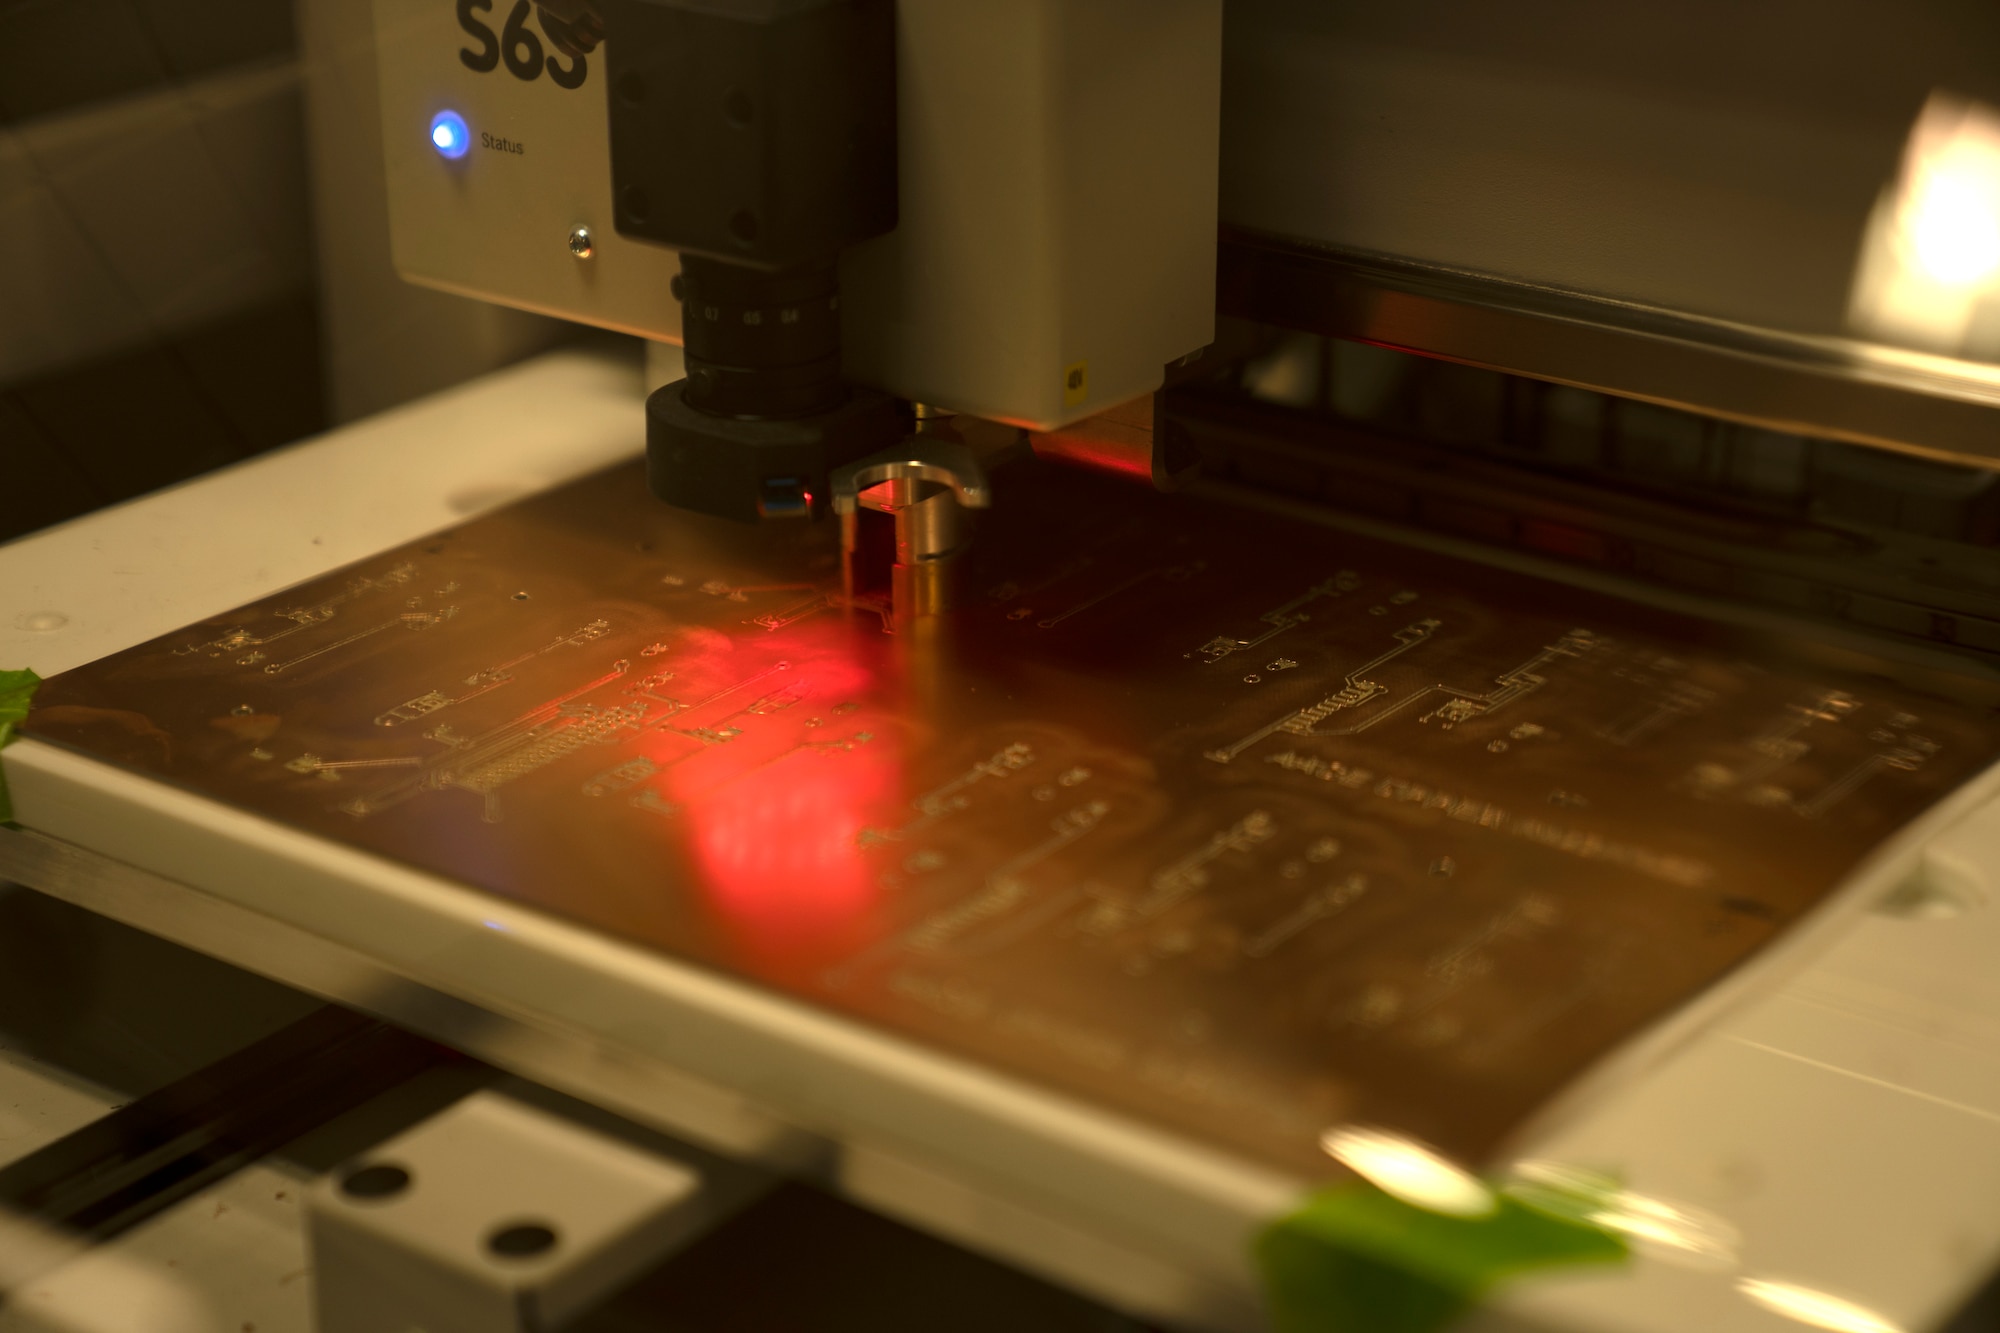 A lasercutting machine carves a circuit board designed by the Trainer Development Center at Keesler Air Force Base, Mississippi, Oct. 2, 2019. The Trainer Development Center produces equipment to further the innovative qualities for Air Force training while staying cost effective. (U.S. Air Force photo by Airman 1st Class Kimberly L. Mueller)